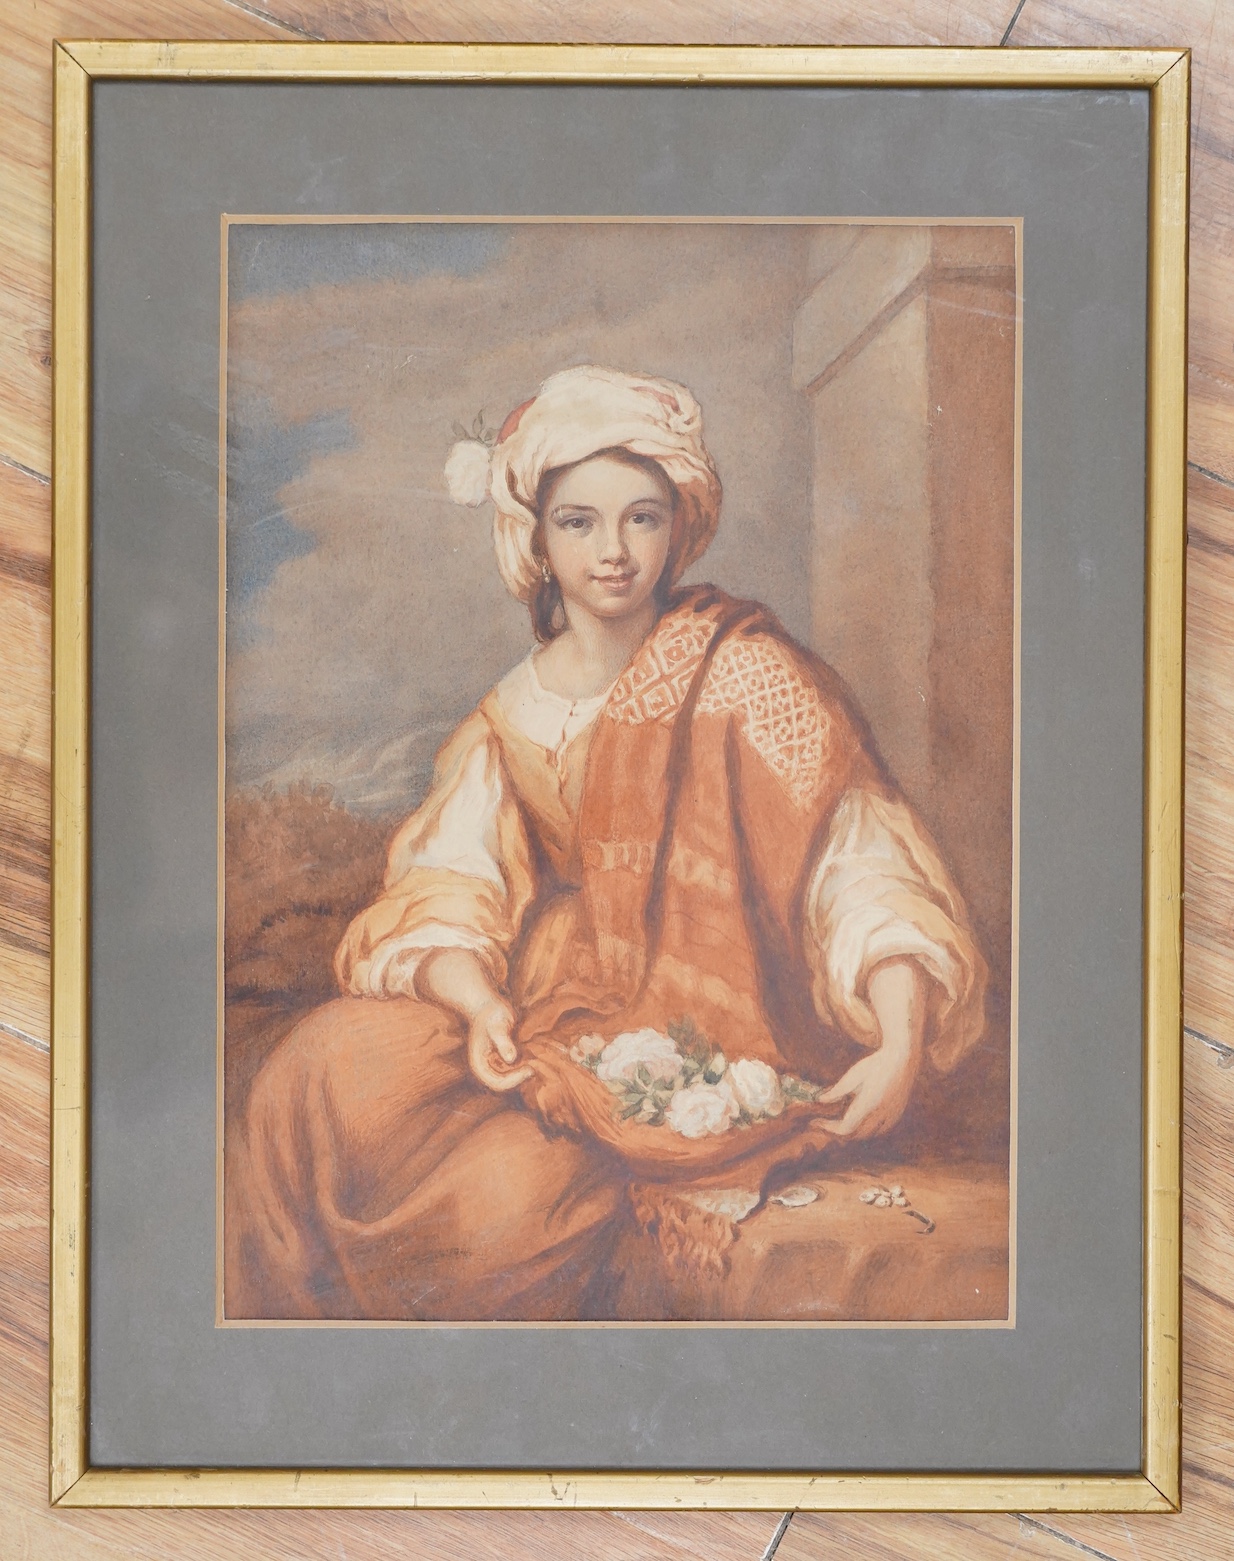 After Bartoleme Esteban Murillo (Spanish, 1618-1682), watercolour, Portrait of a girl with flowers, 34 x 24cm. Condition - fair, some staining and discolouration